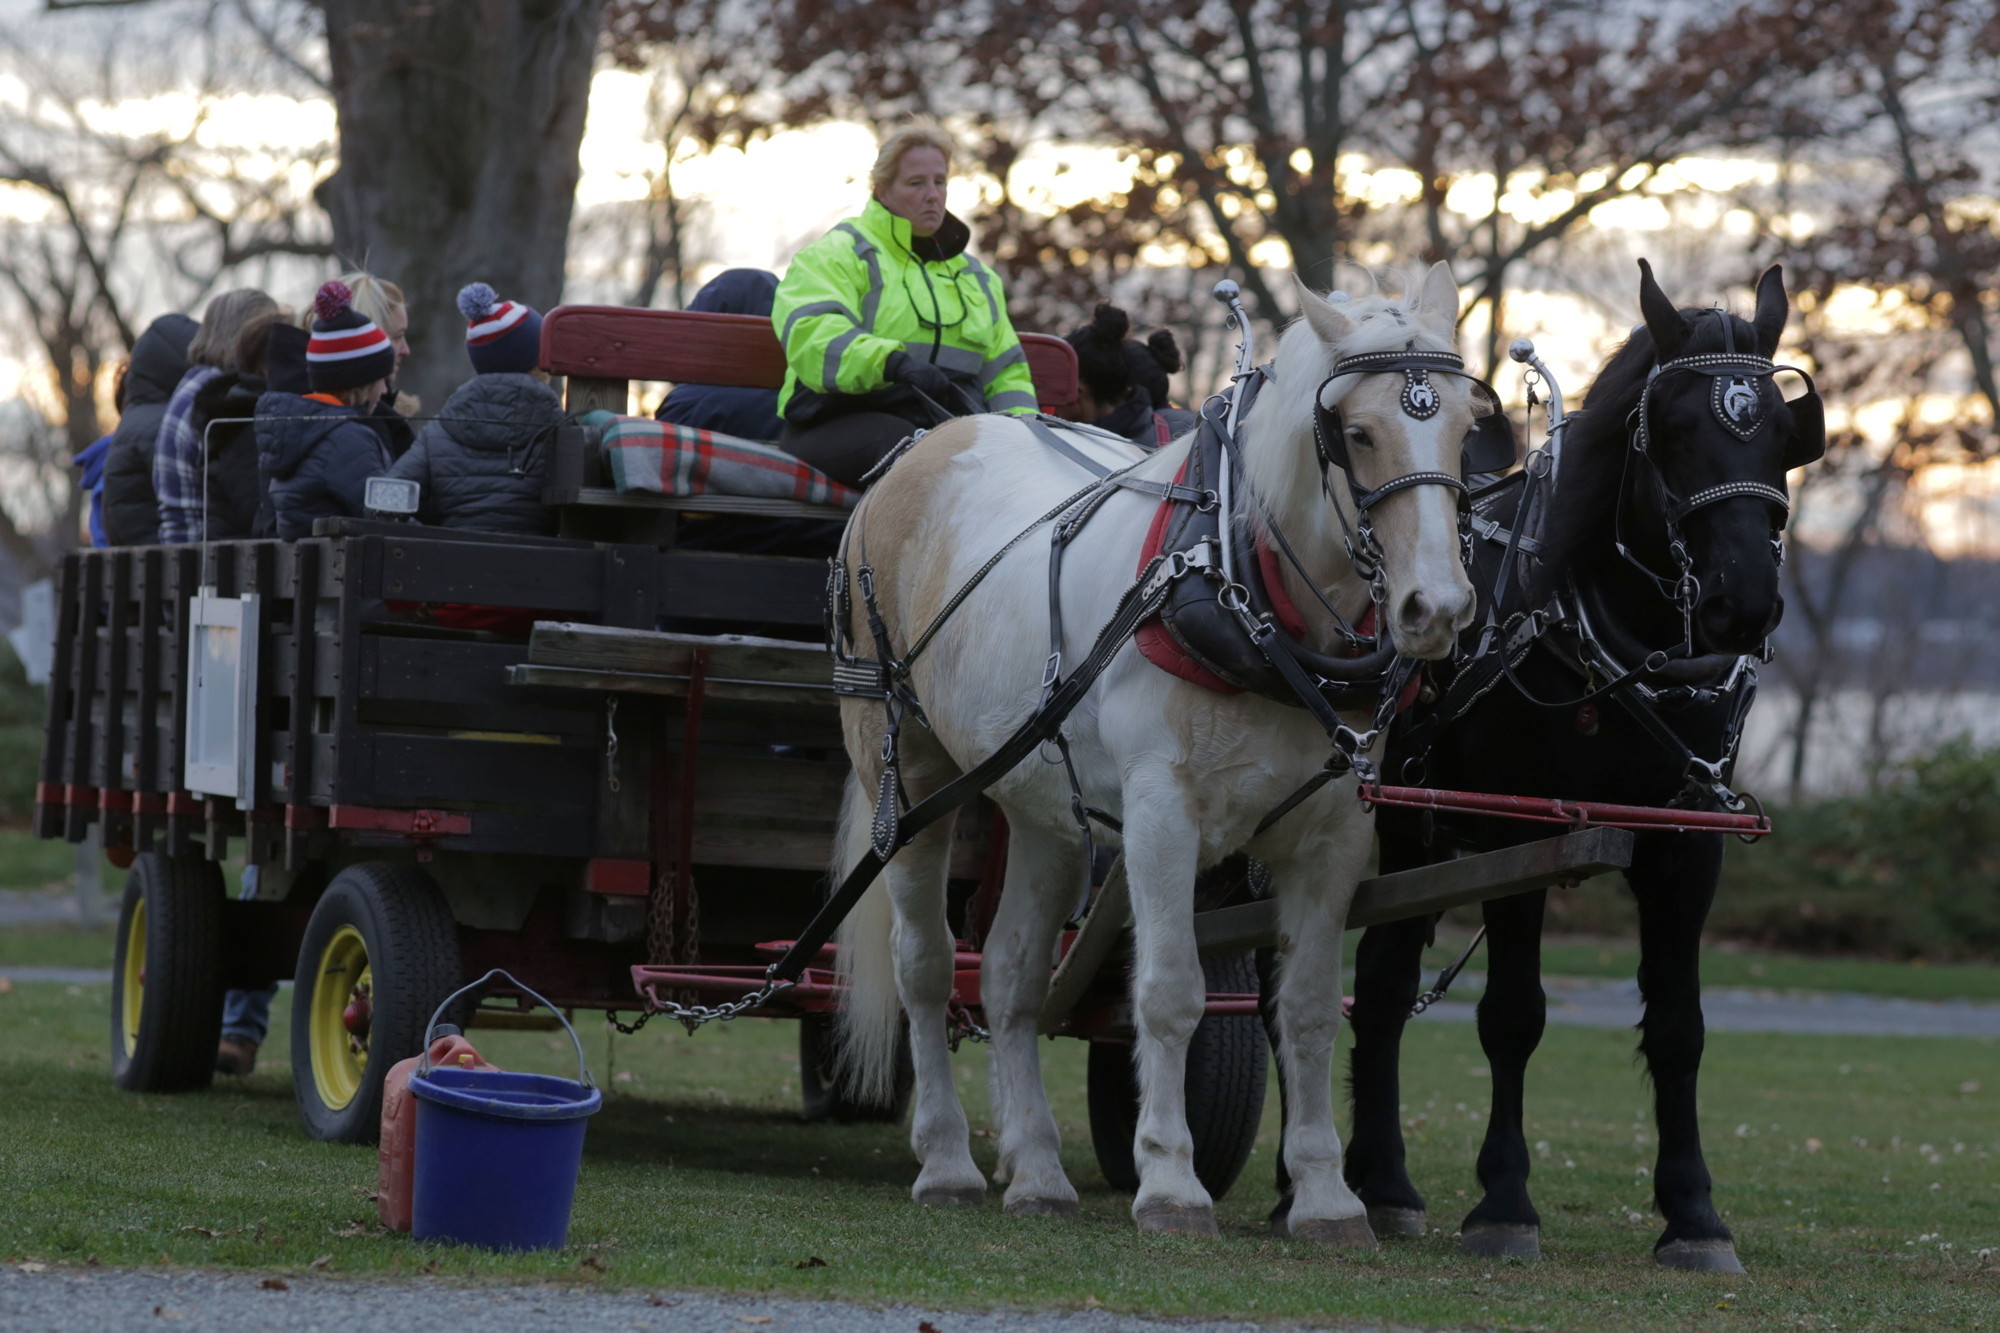 The holiday horse drawn carriage pulls away from Crescent Park with a full group of passengers.